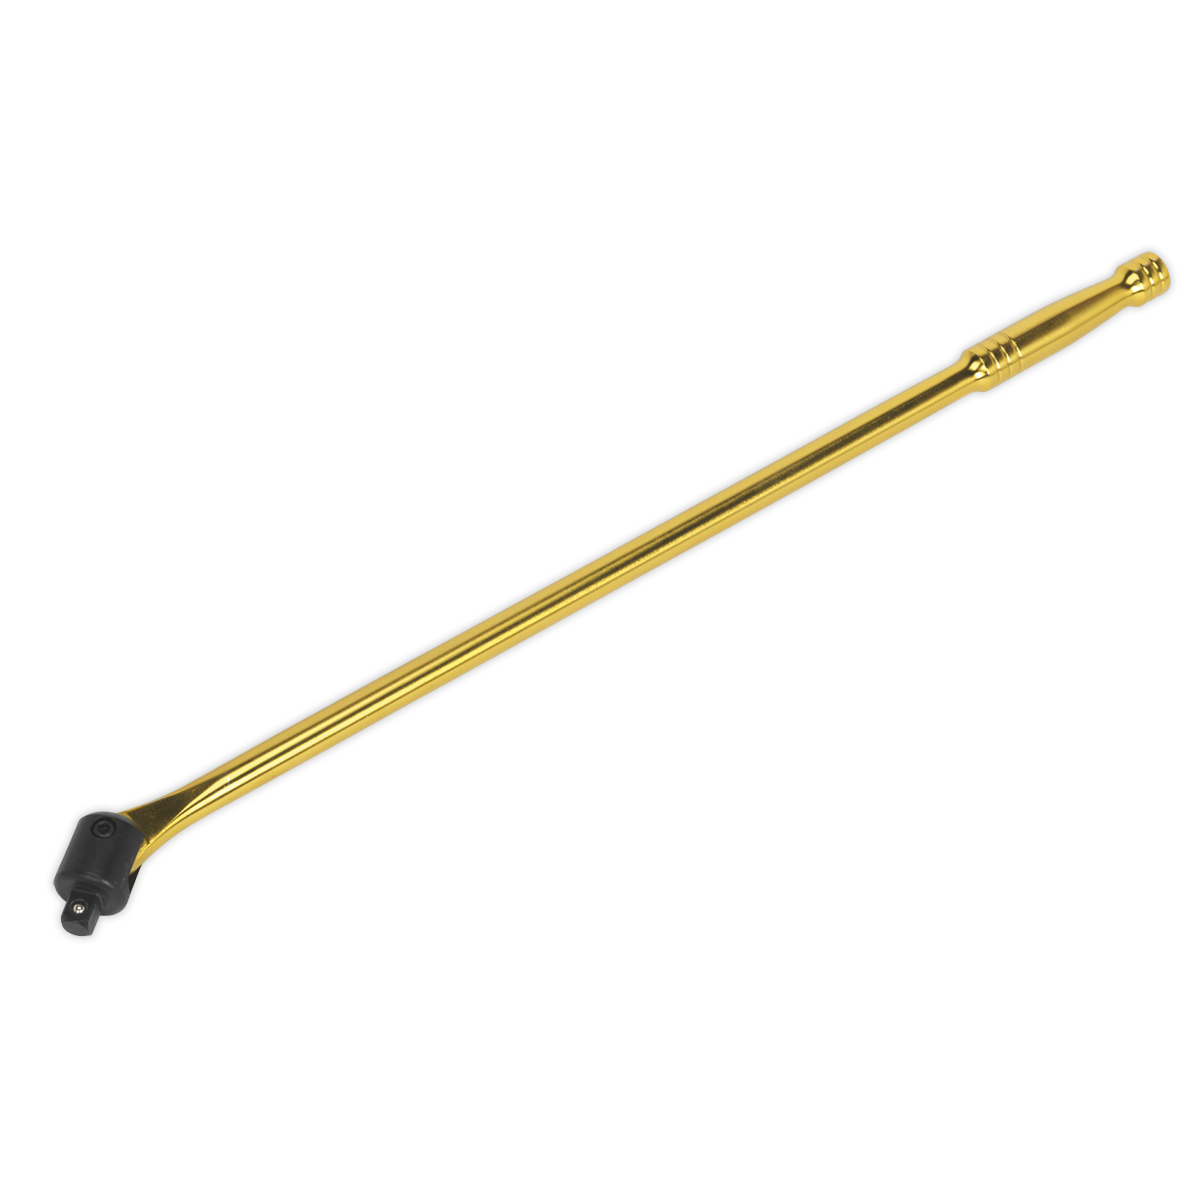 Breaker Bar 600mm 1/2"Sq Drive Gold | Hardened and tempered Chrome Vanadium steel bar with a coloured high chrome finish. | toolforce.ie